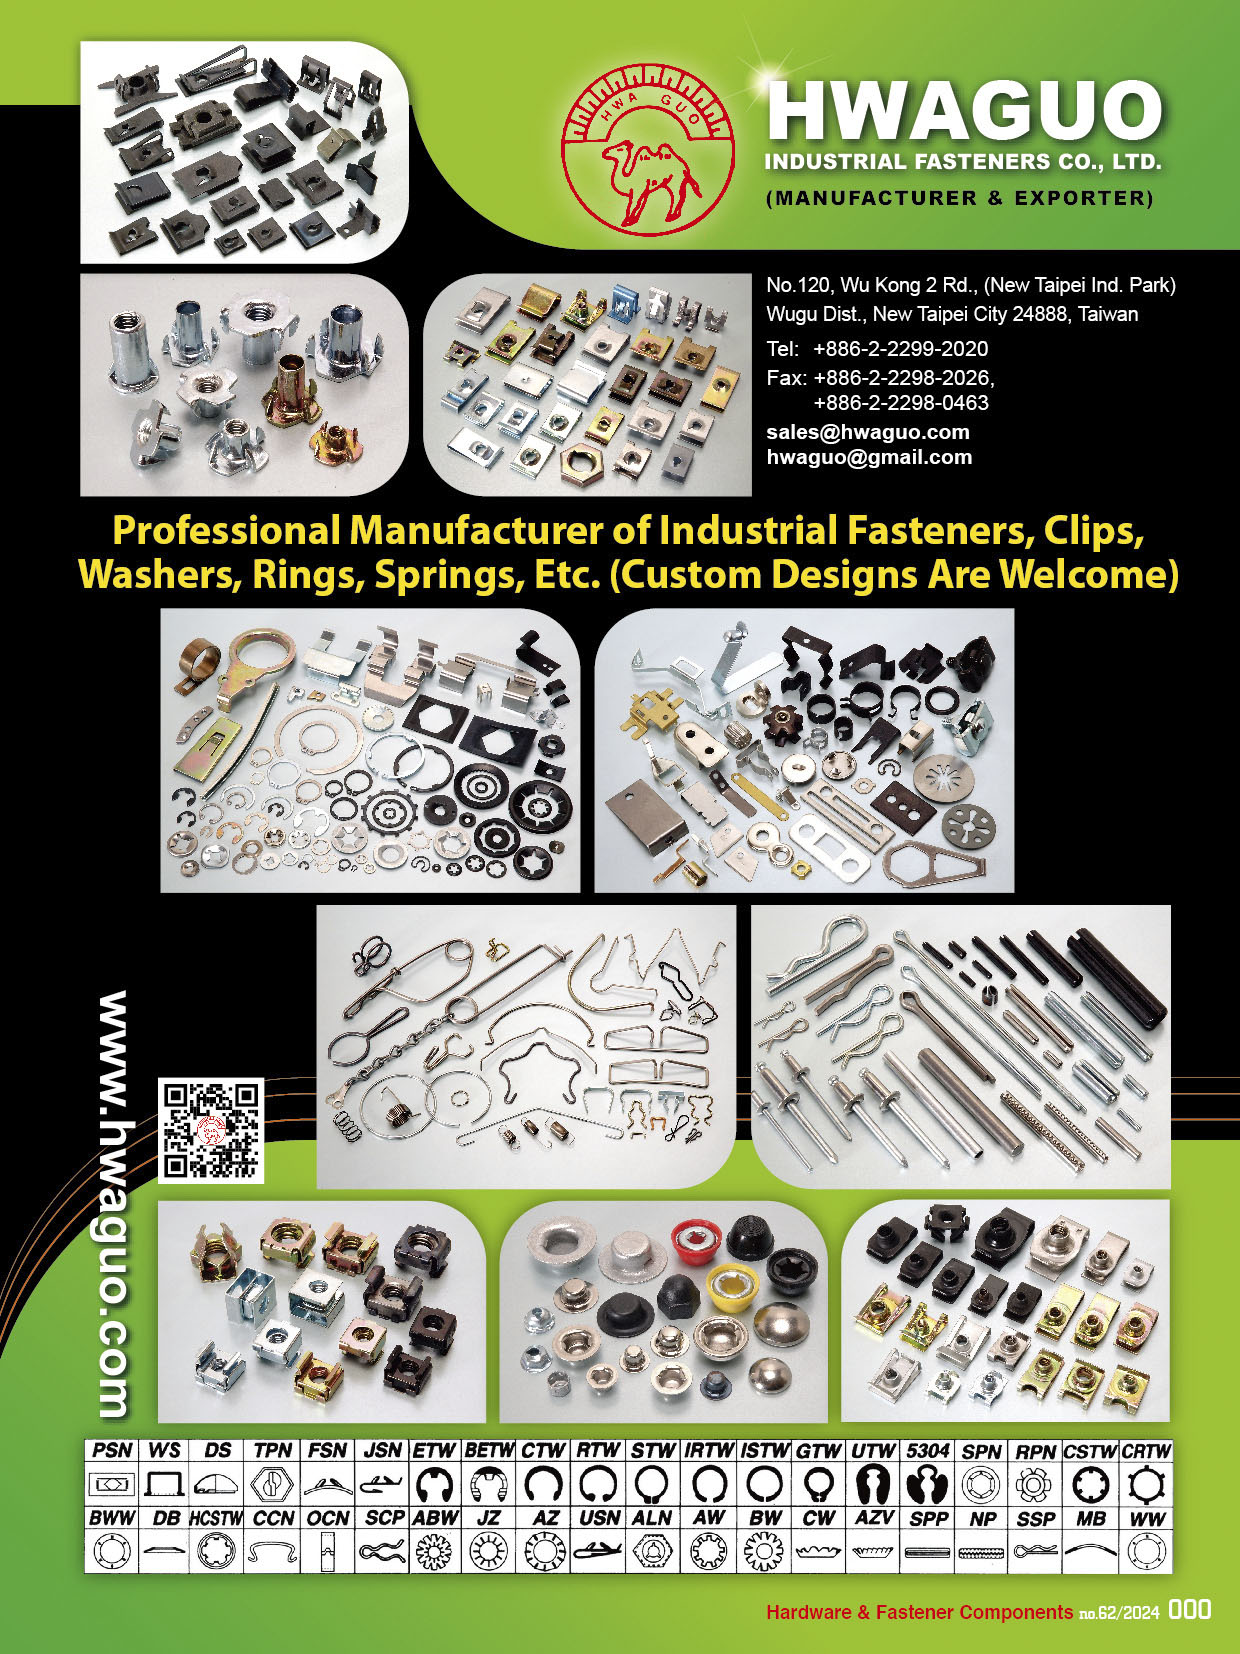 HWAGUO INDUSTRIAL FASTENERS CO., LTD. , U-Nuts,Speed Nuts,U-Clips / V-Clips,Cap Nuts / Hutclips / Push on Caps,Turned Parts,Tee Nuts / T-Nuts,Cage Nuts,Retaining Rings / E-Rings / C-Rings,Washers,Customized Shapes,Rivets / Eyelets,Screws / Bolts,Plastic / Nylon /Rubber / Screw Assembly,Nuts,Springs